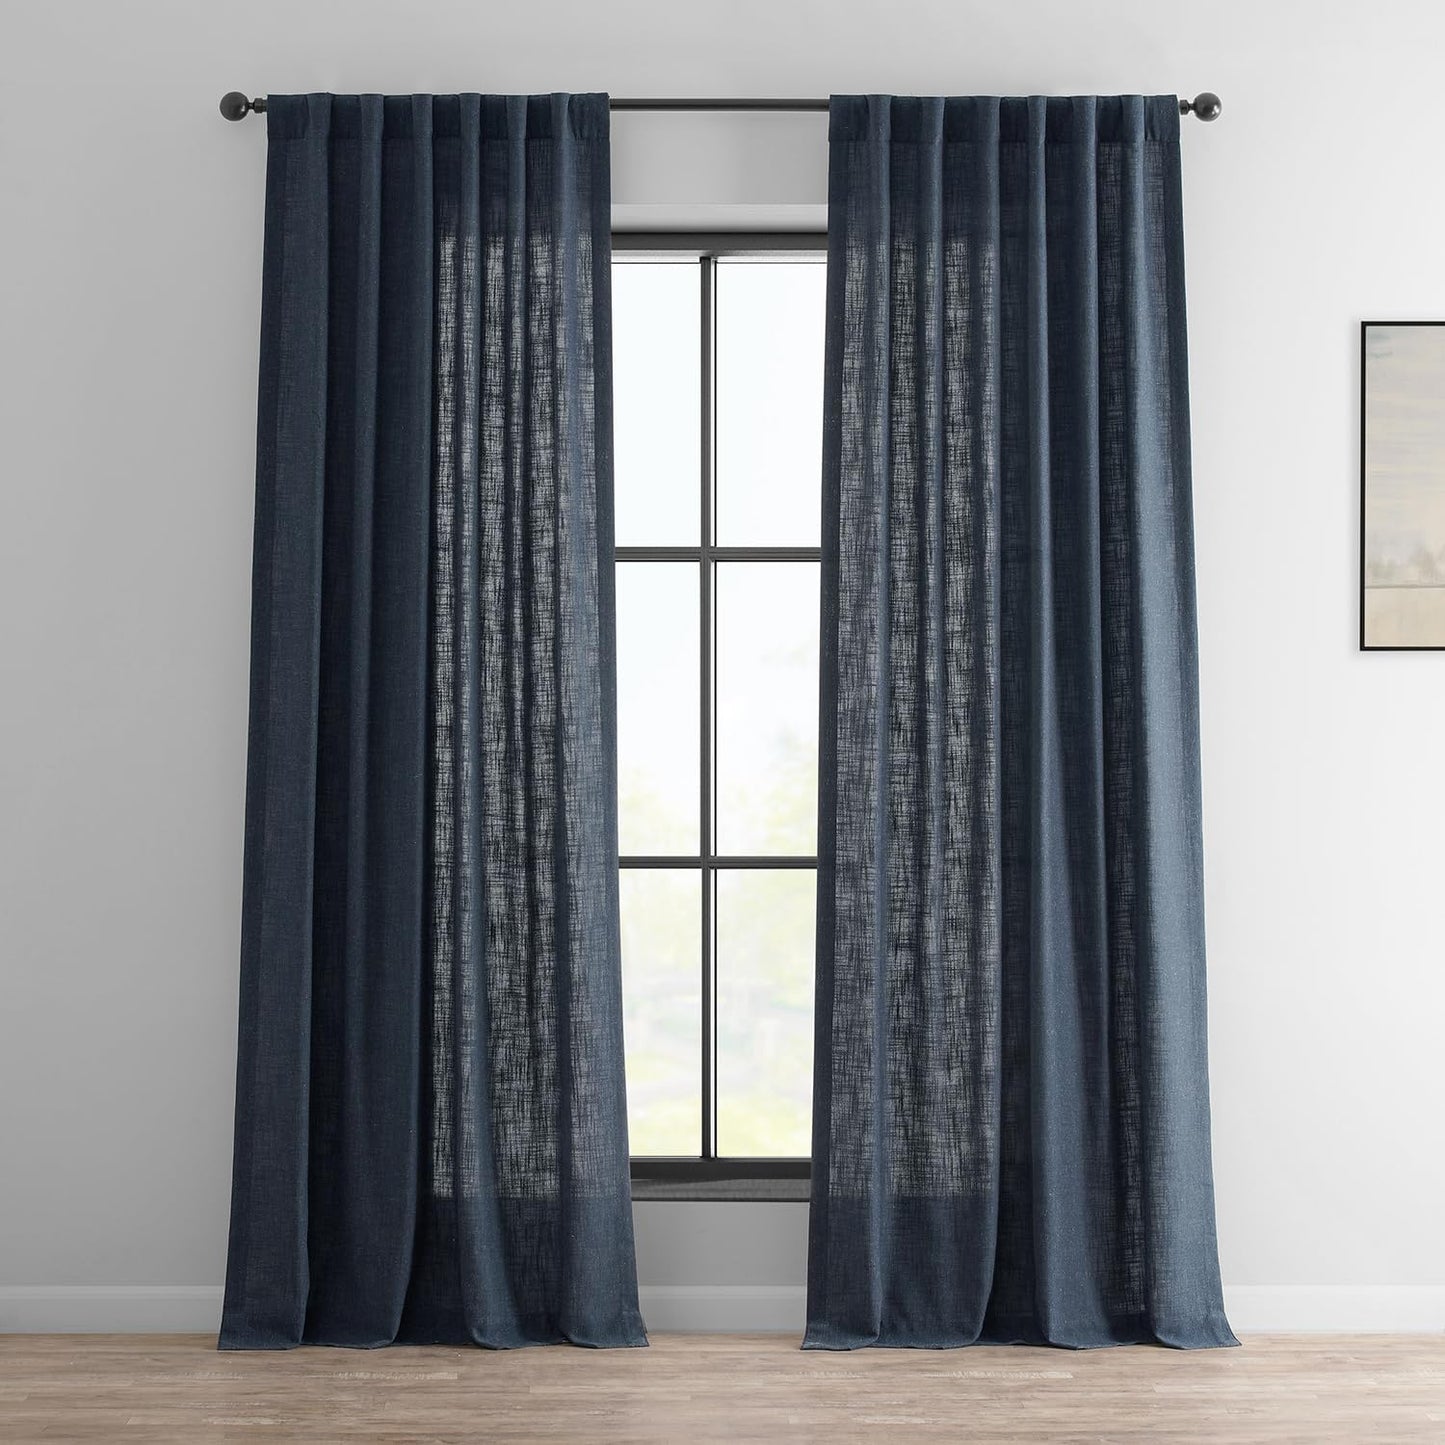 HPD Half Price Drapes Semi Sheer Faux Linen Curtains for Bedroom 96 Inches Long Light Filtering Living Room Window Curtain (1 Panel), 50W X 96L, Rice White  EFF British Navy 50W X 120L 